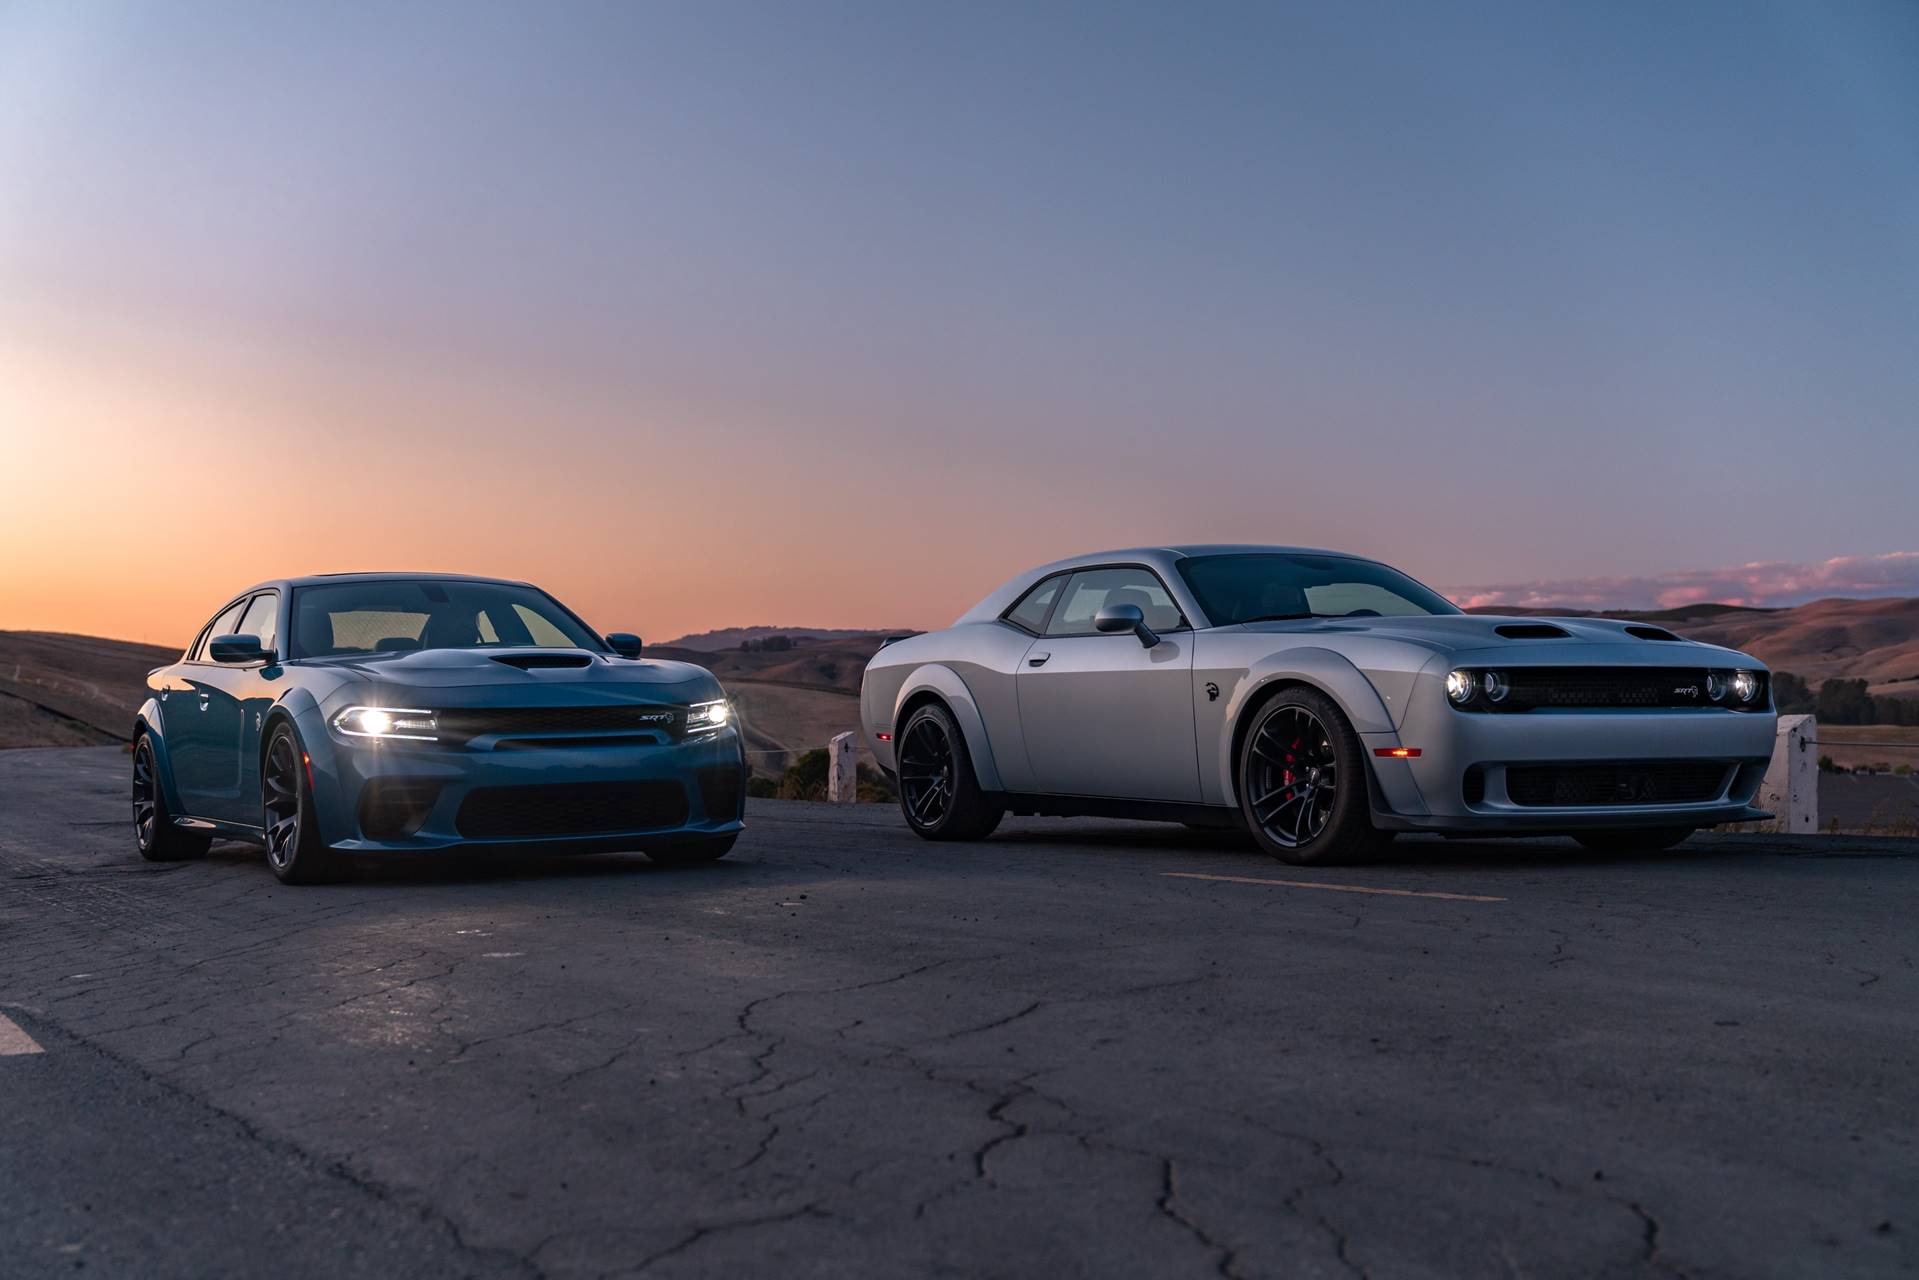 Dodge Brand Wins A Kelley Blue Book Brand Image Award For The Second Consecutive Year